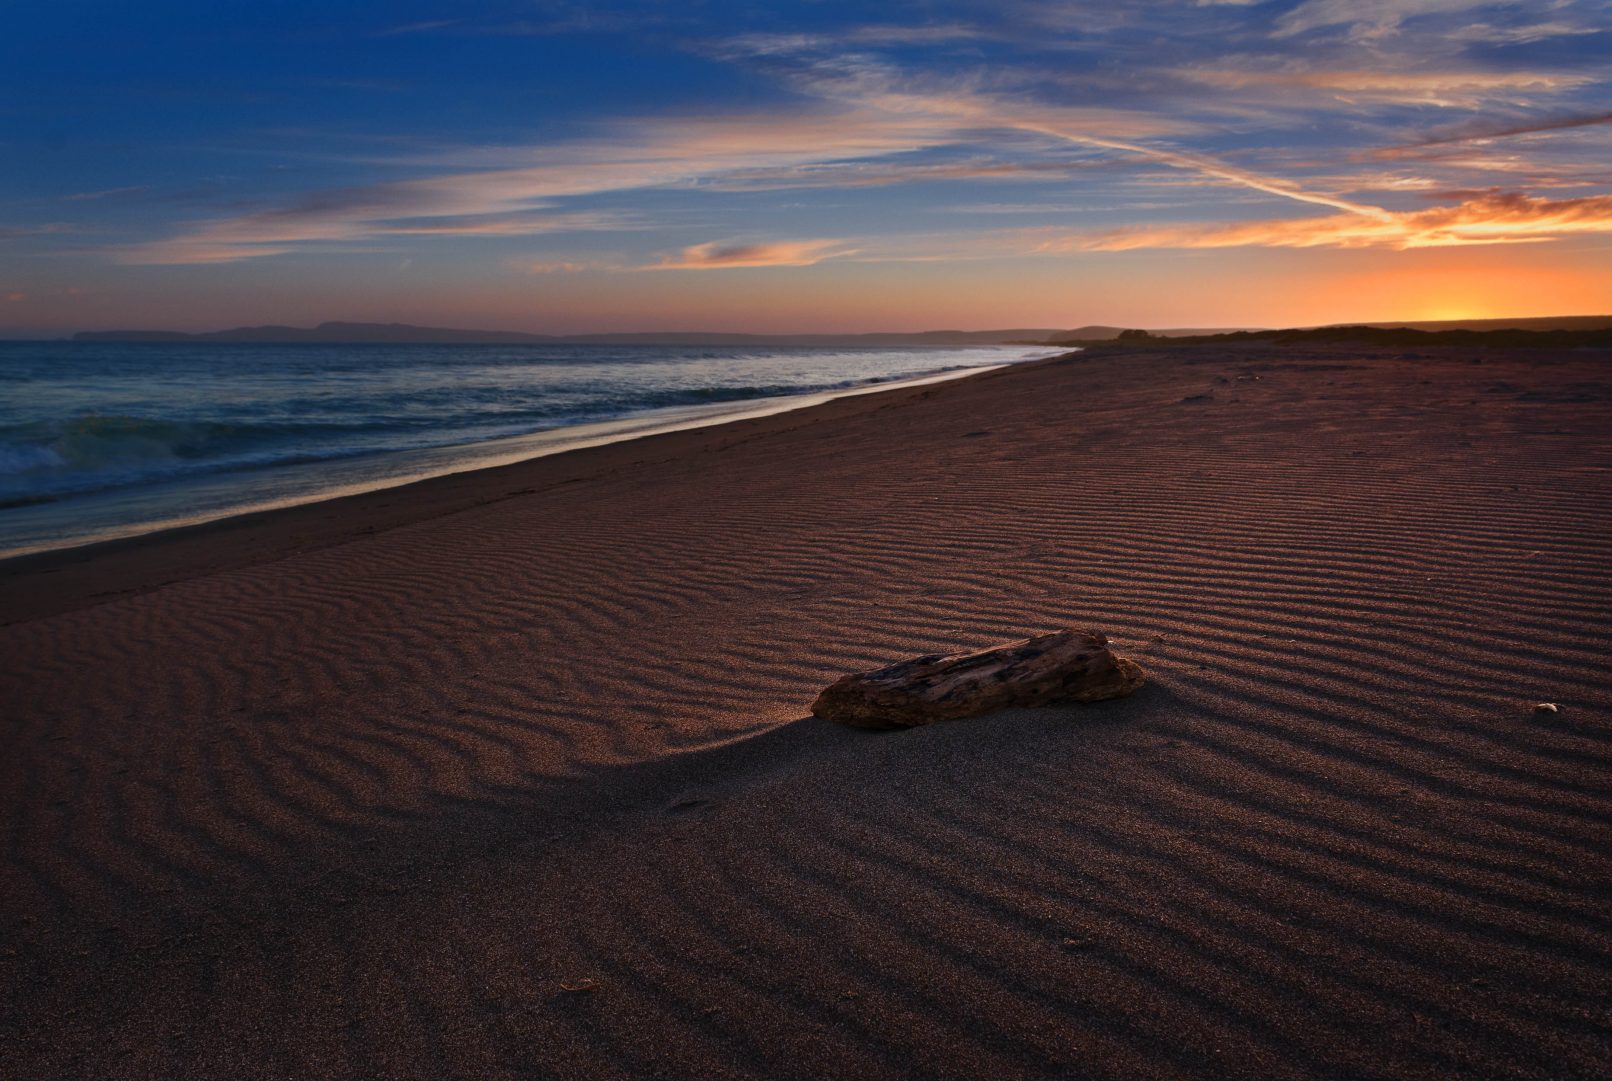 Beach sunset with wood and ridges in sand